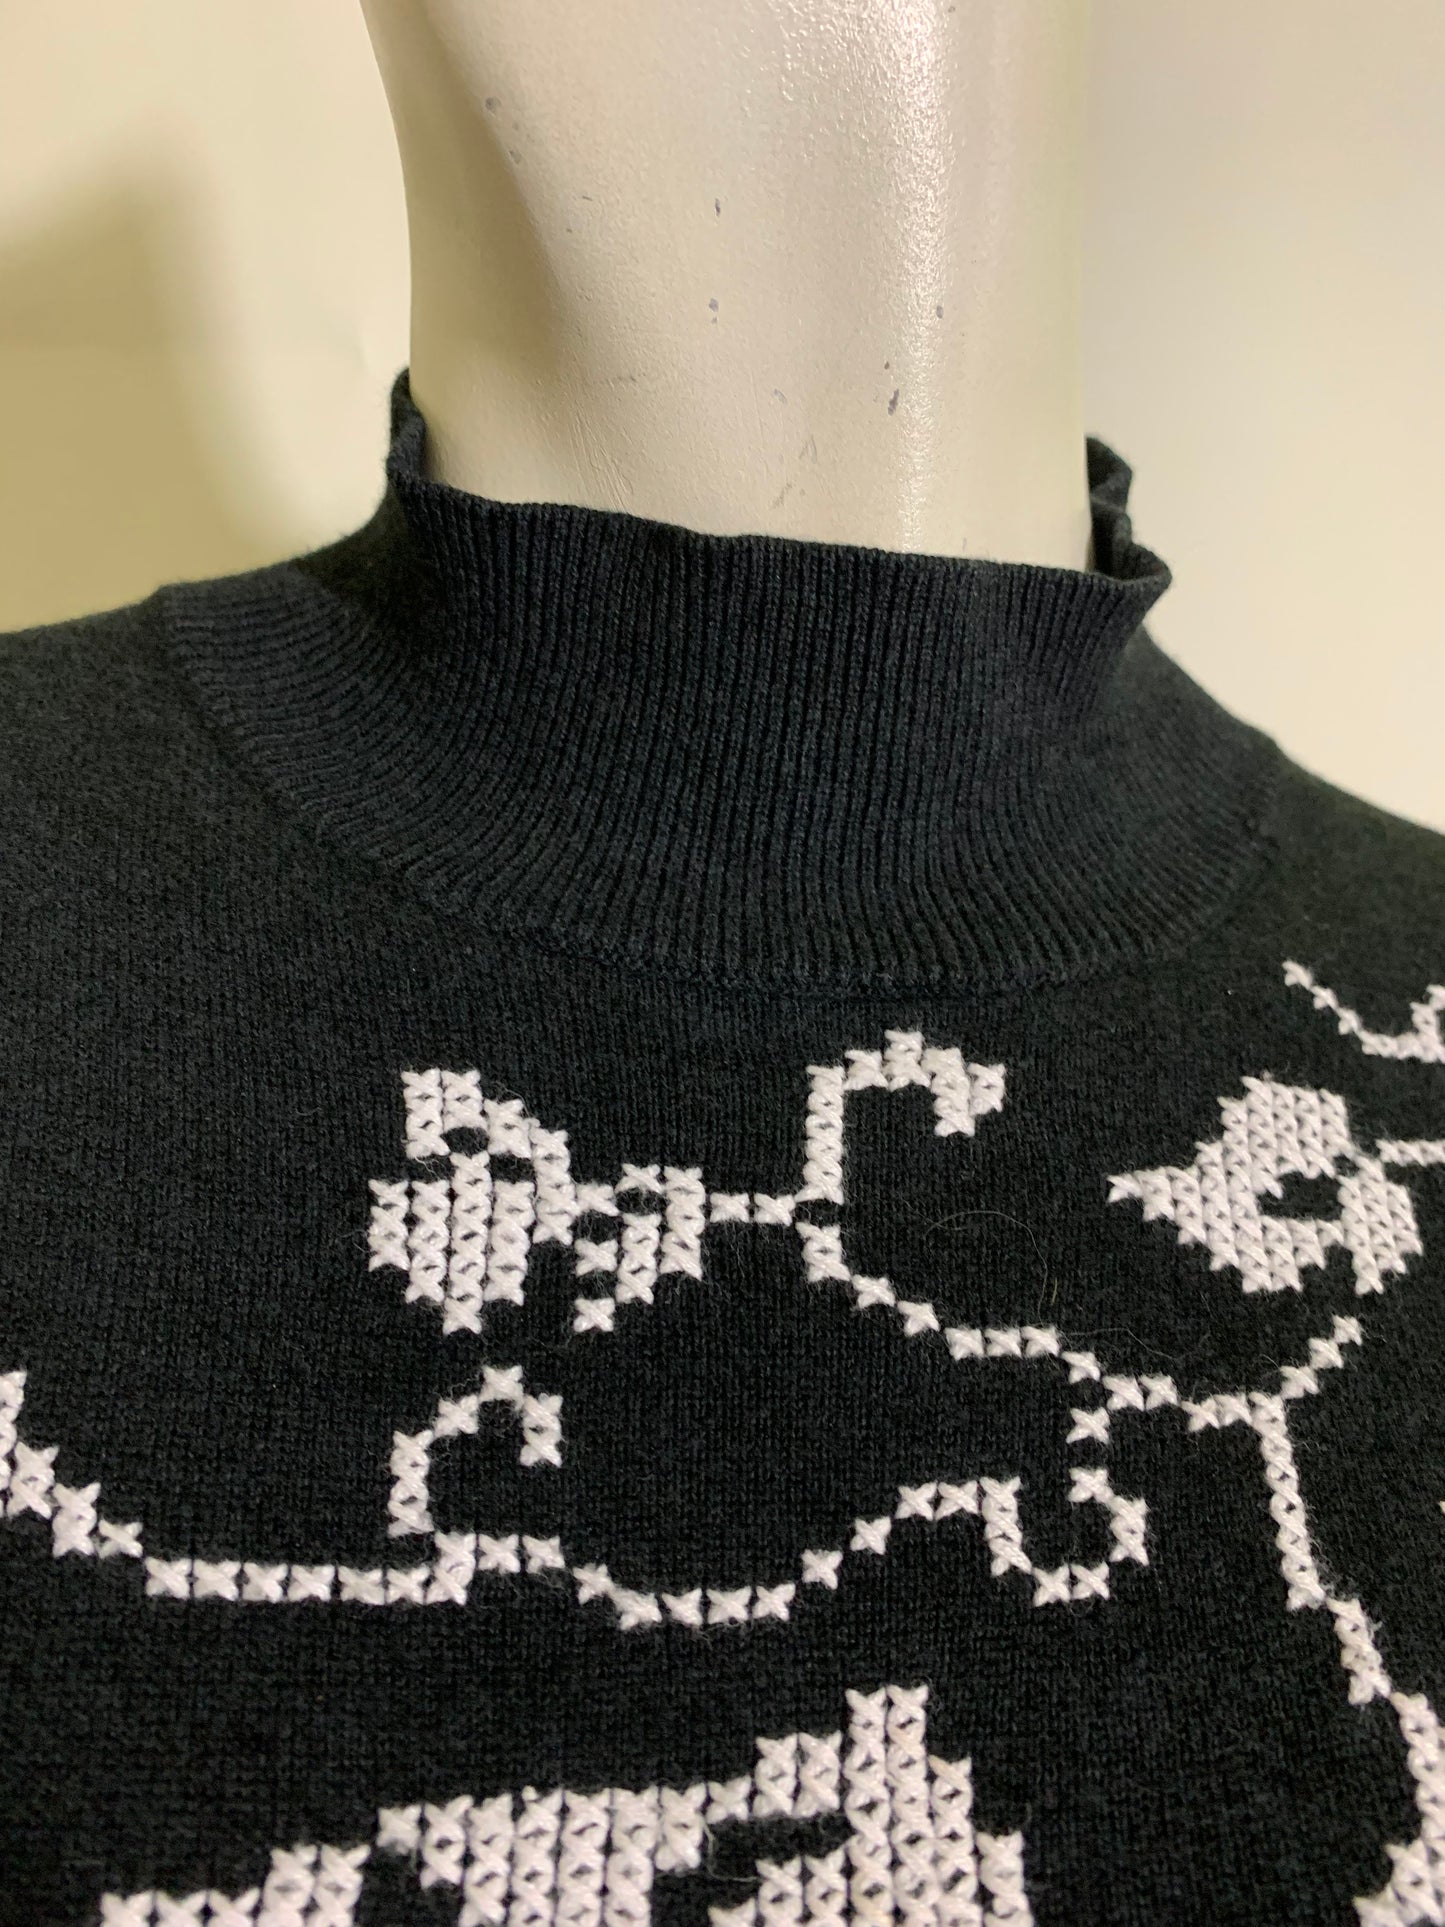 Black Puffed Shoulder Cross Stitched Long Sleeved Sweater circa 1970s